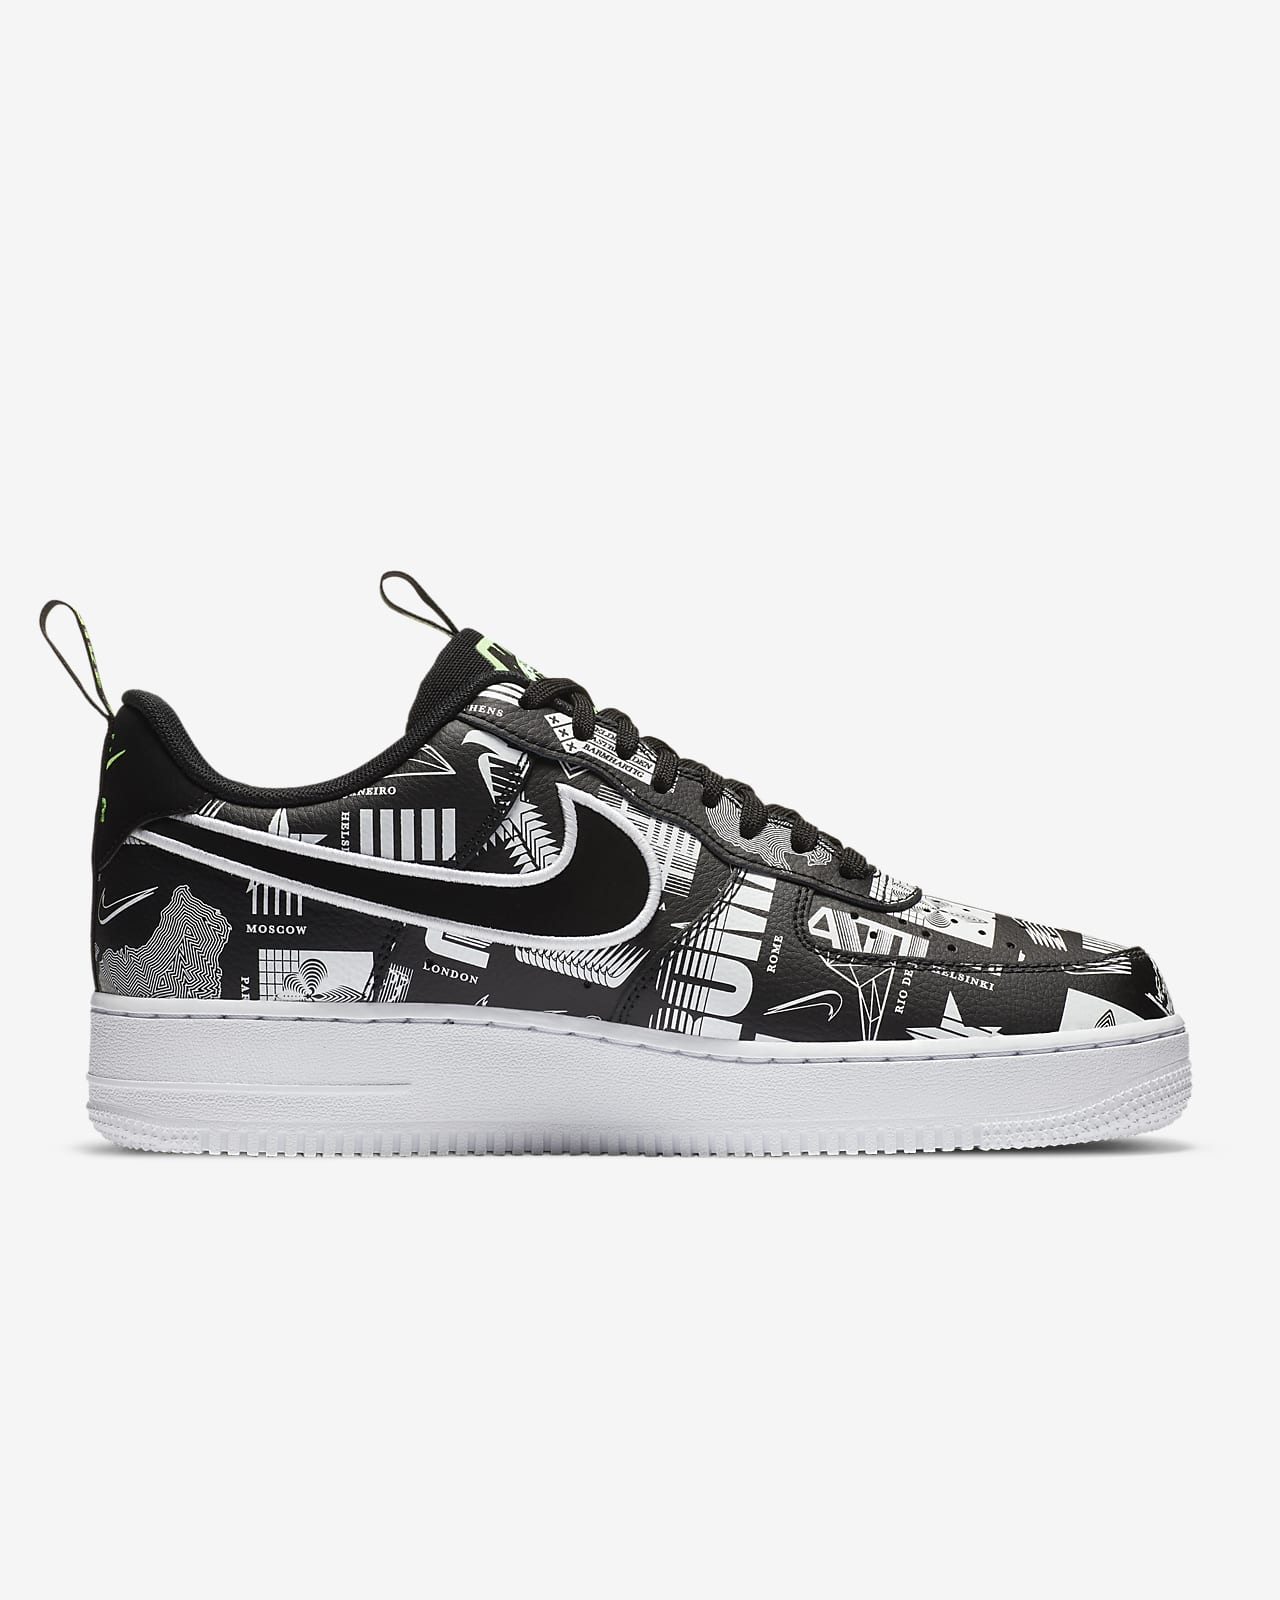 nike mens shoes air force